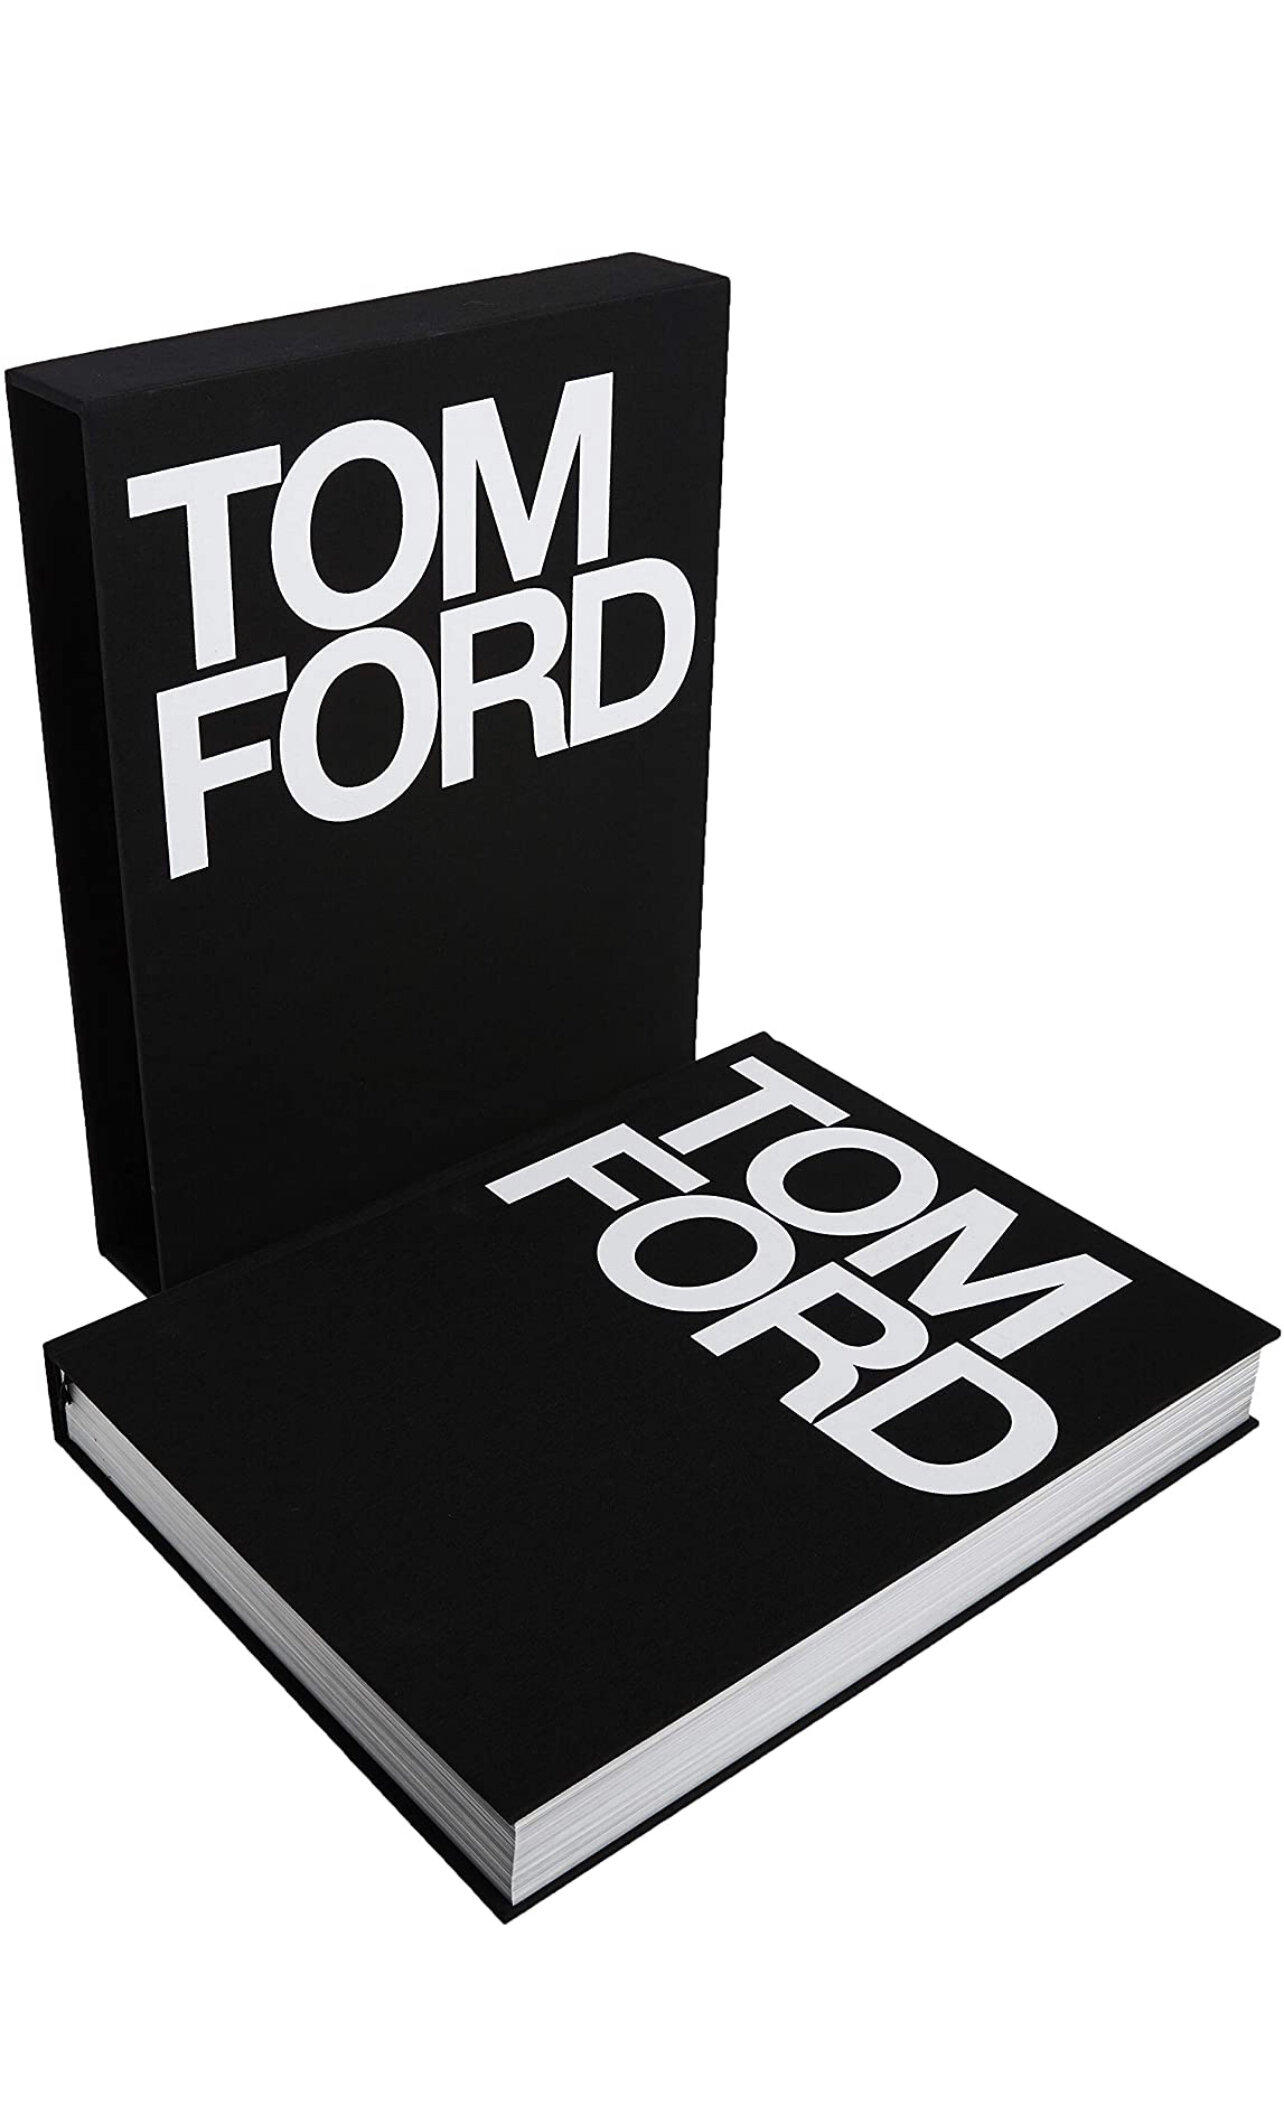 Tom Ford [Book]